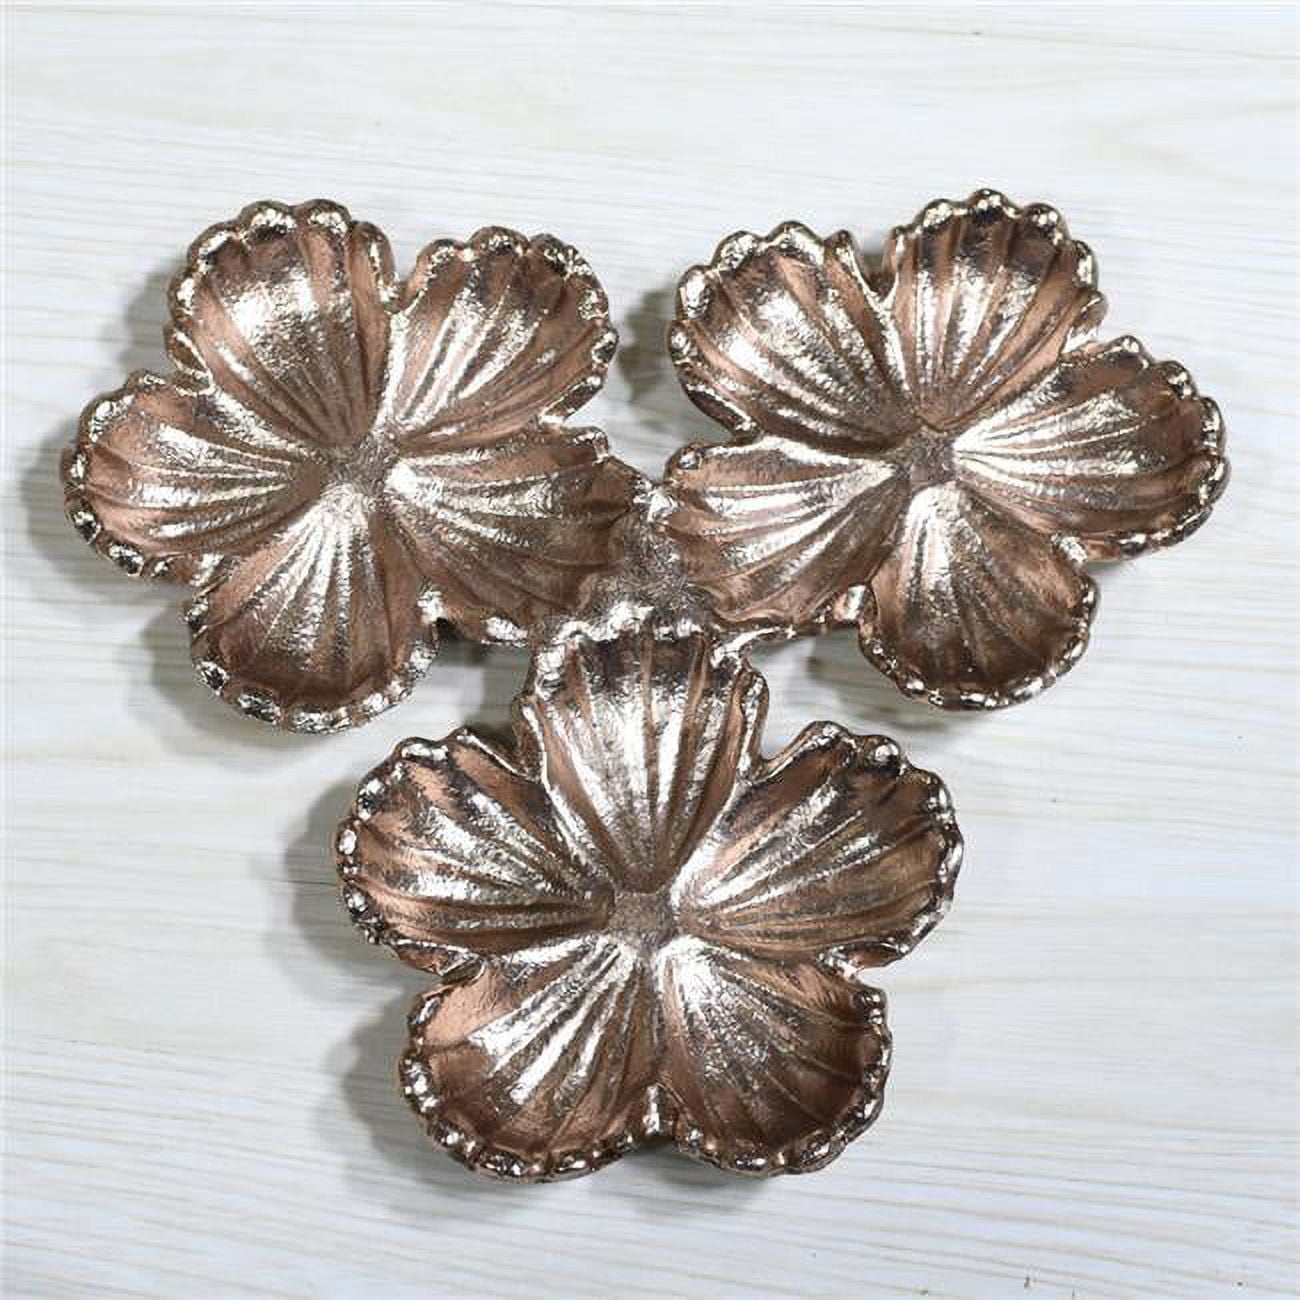 Picture of BBH Homes UBBBVK039AB2020SC3HS 8.26 x 8.26 x 0.98 in. Handmade Bronze Coated Decorative Aluminum Tray